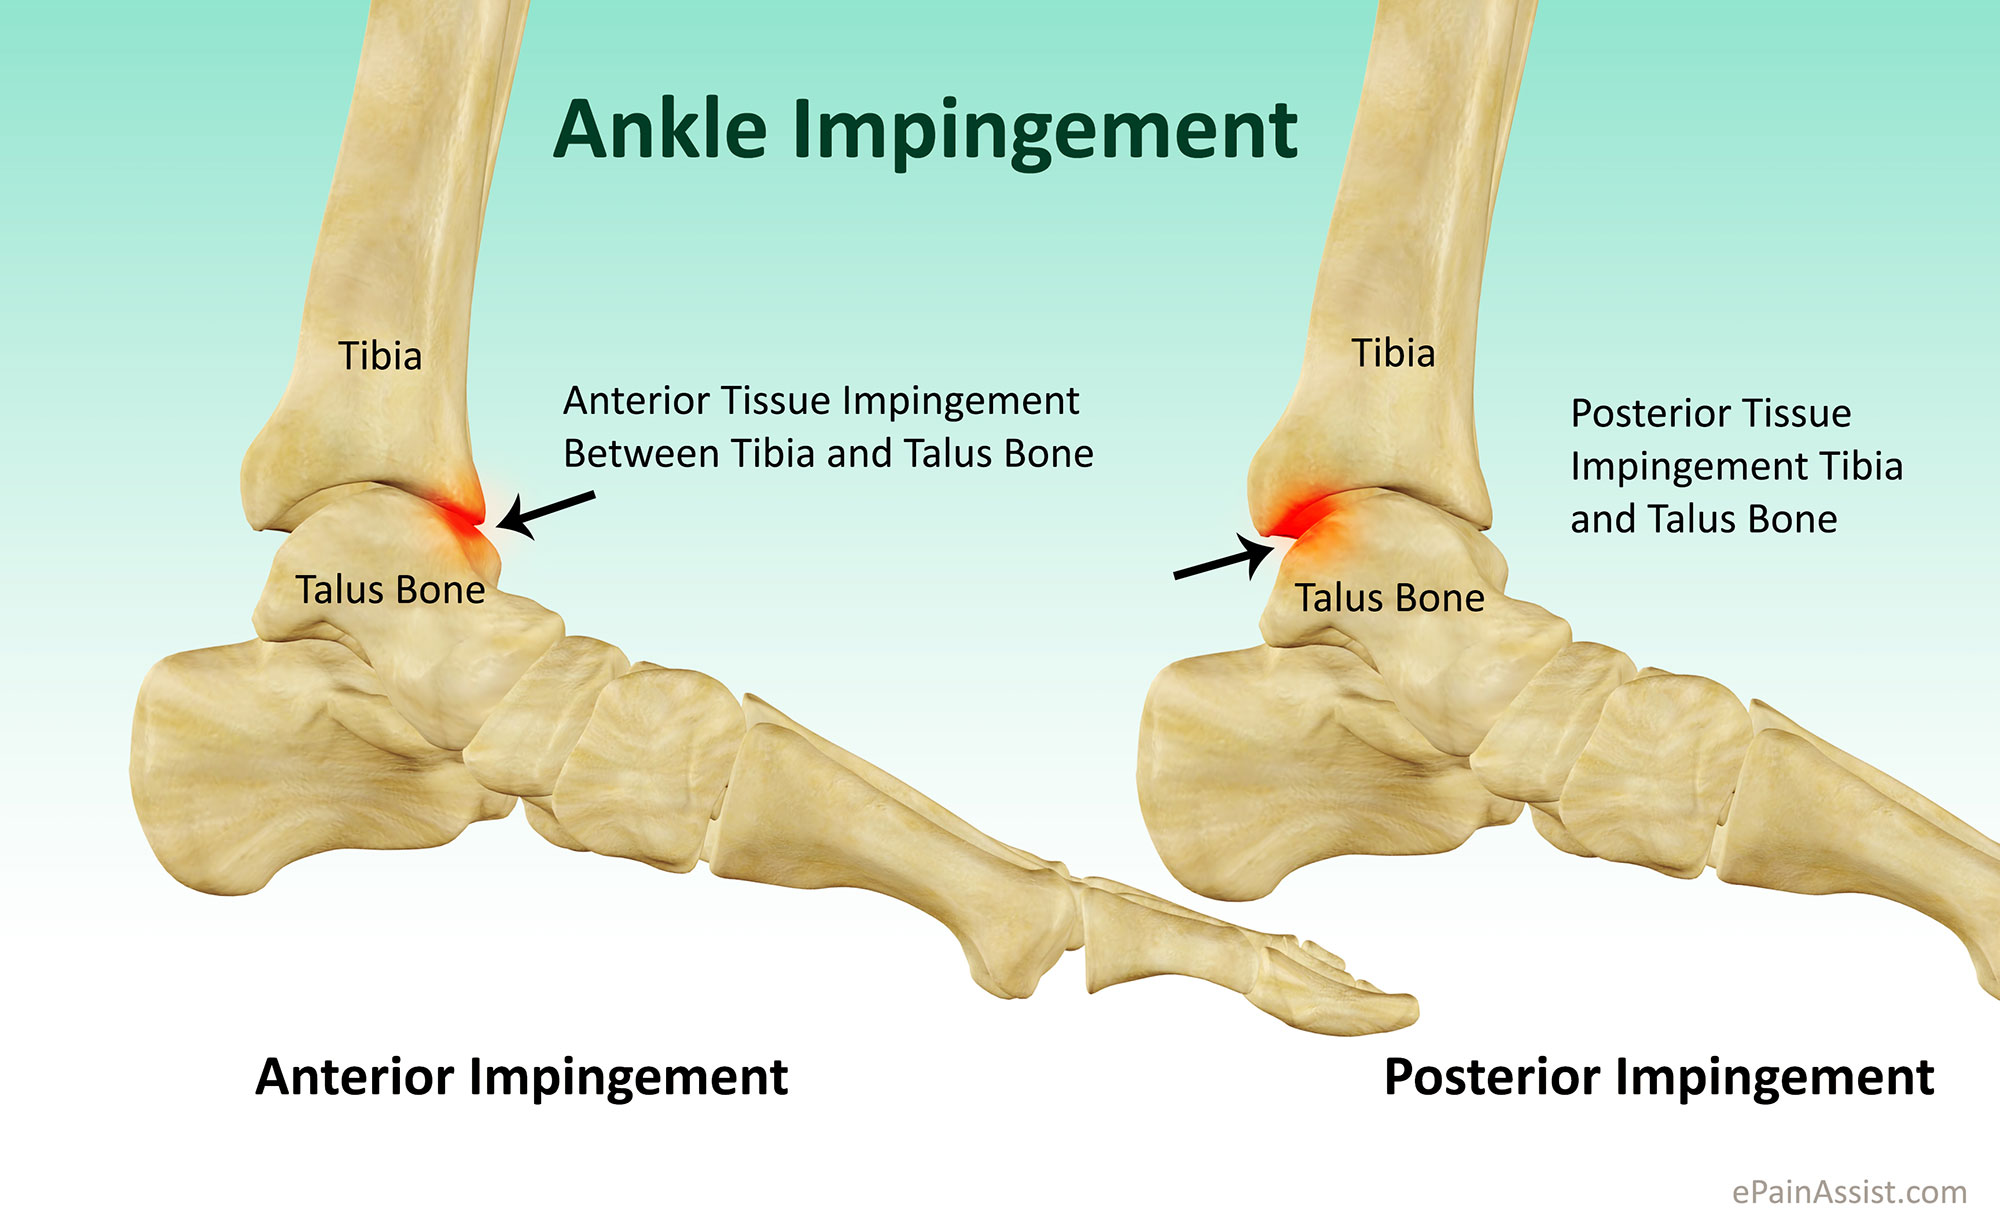 Anterior Ankle Impingement Book In At Podiatry Hq Clinics Today